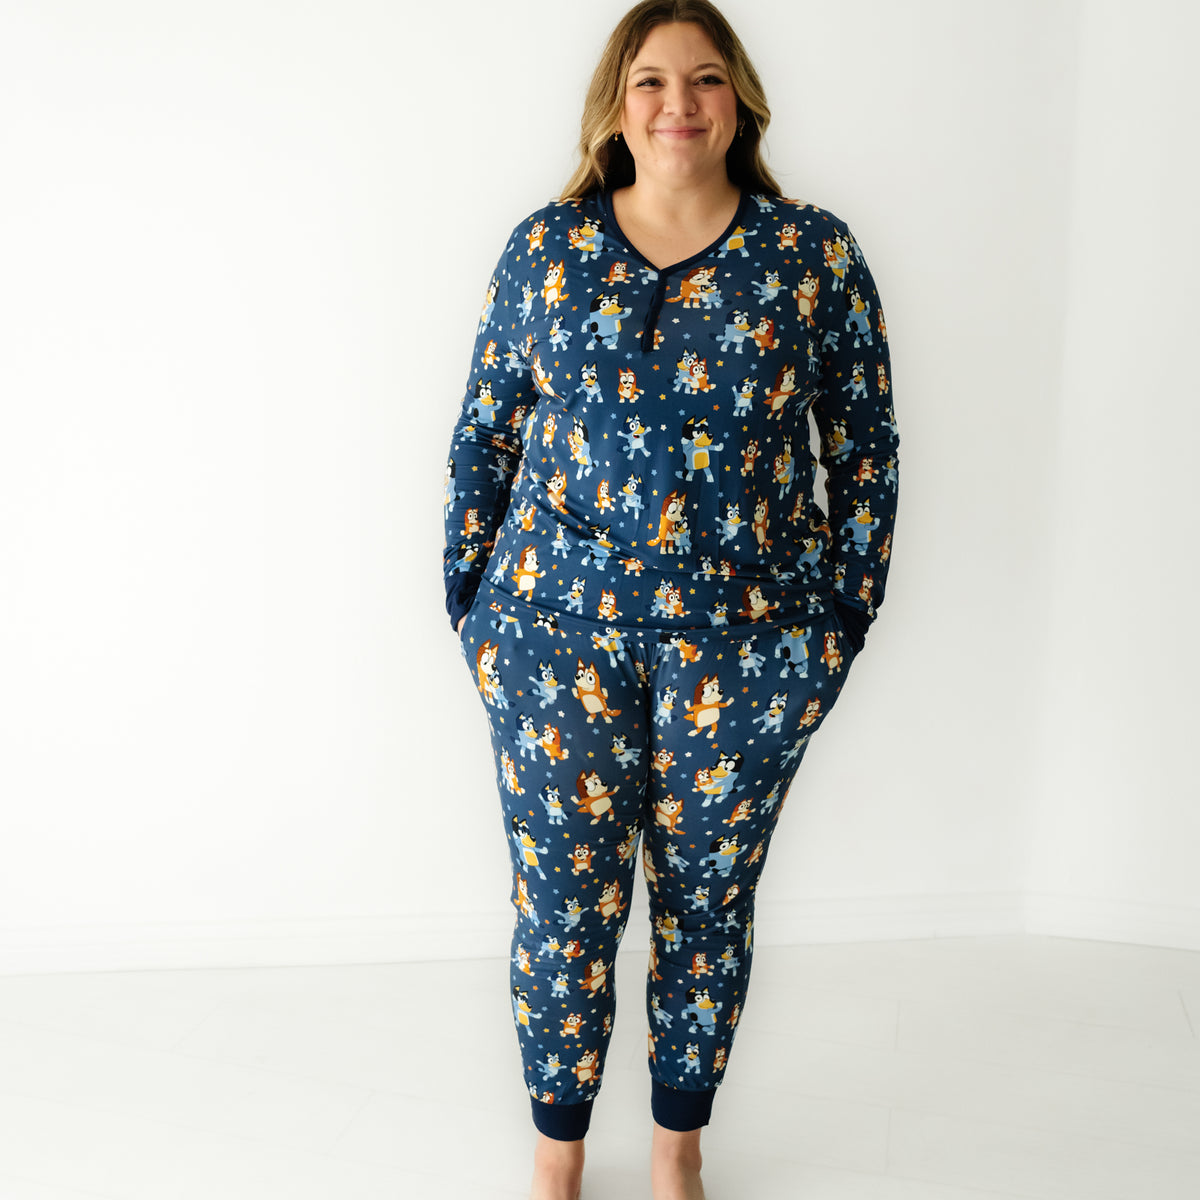 Discover the World's Most Comfortable Women's Pajamas! – Cool-jams